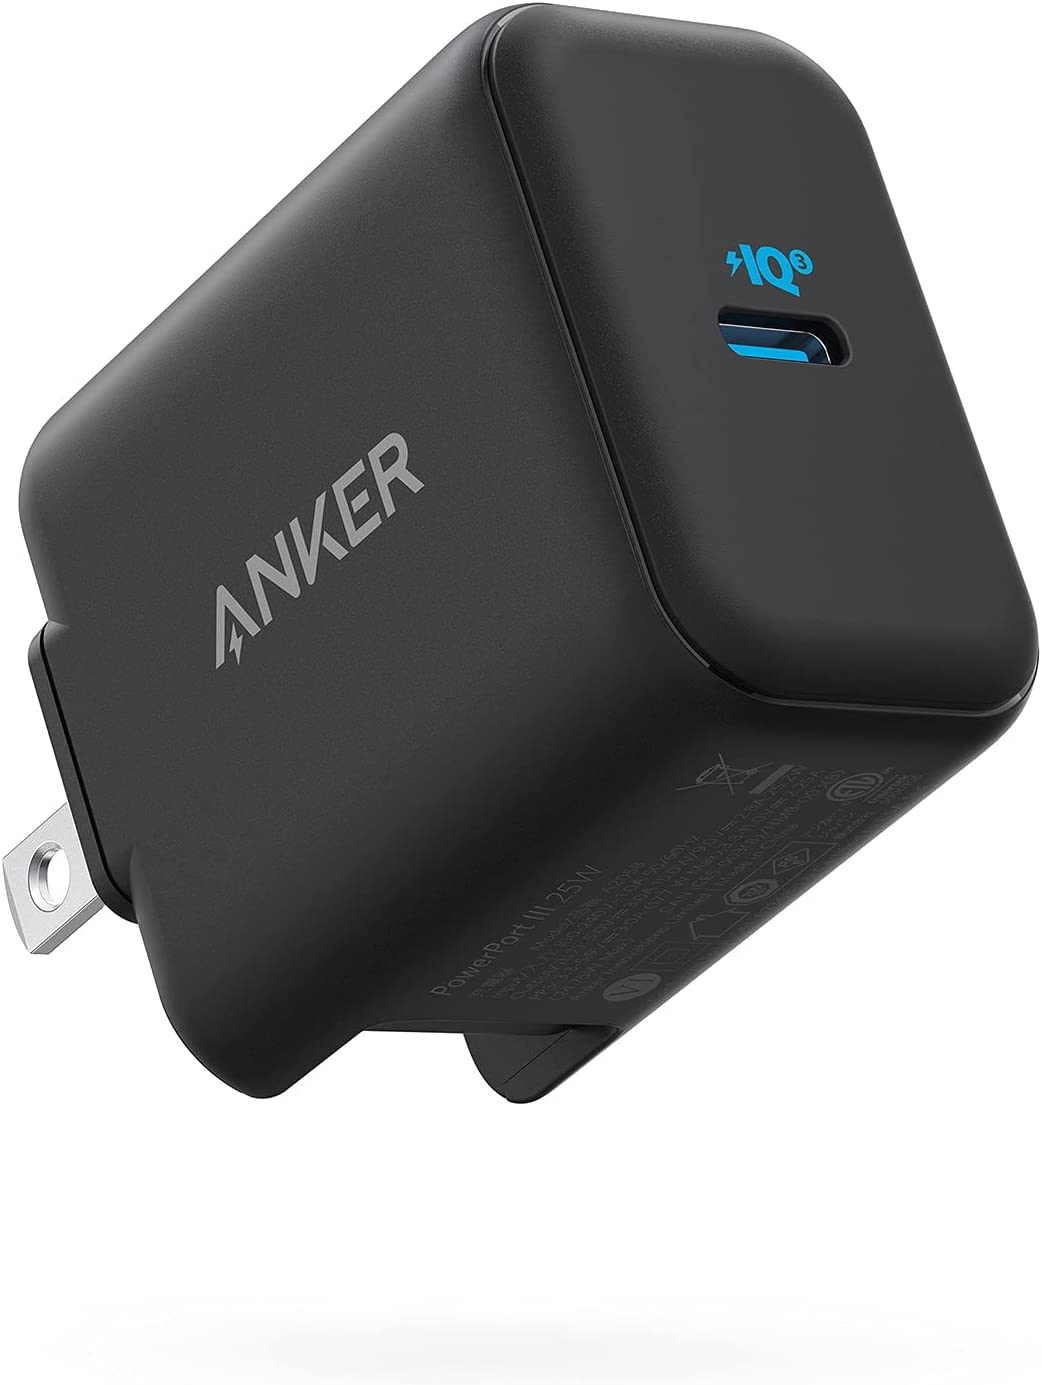 USB C Super Fast Charger, Anker 25W PD Wall Charger Fast Charging for Samsung Galaxy S21/S21+/S21 Ultra/S20/Z Flip/Note20/20 Ultra/Note10/10+/S9/S8/S10e, iPad Pro 12.9, and More (Cable not Included)